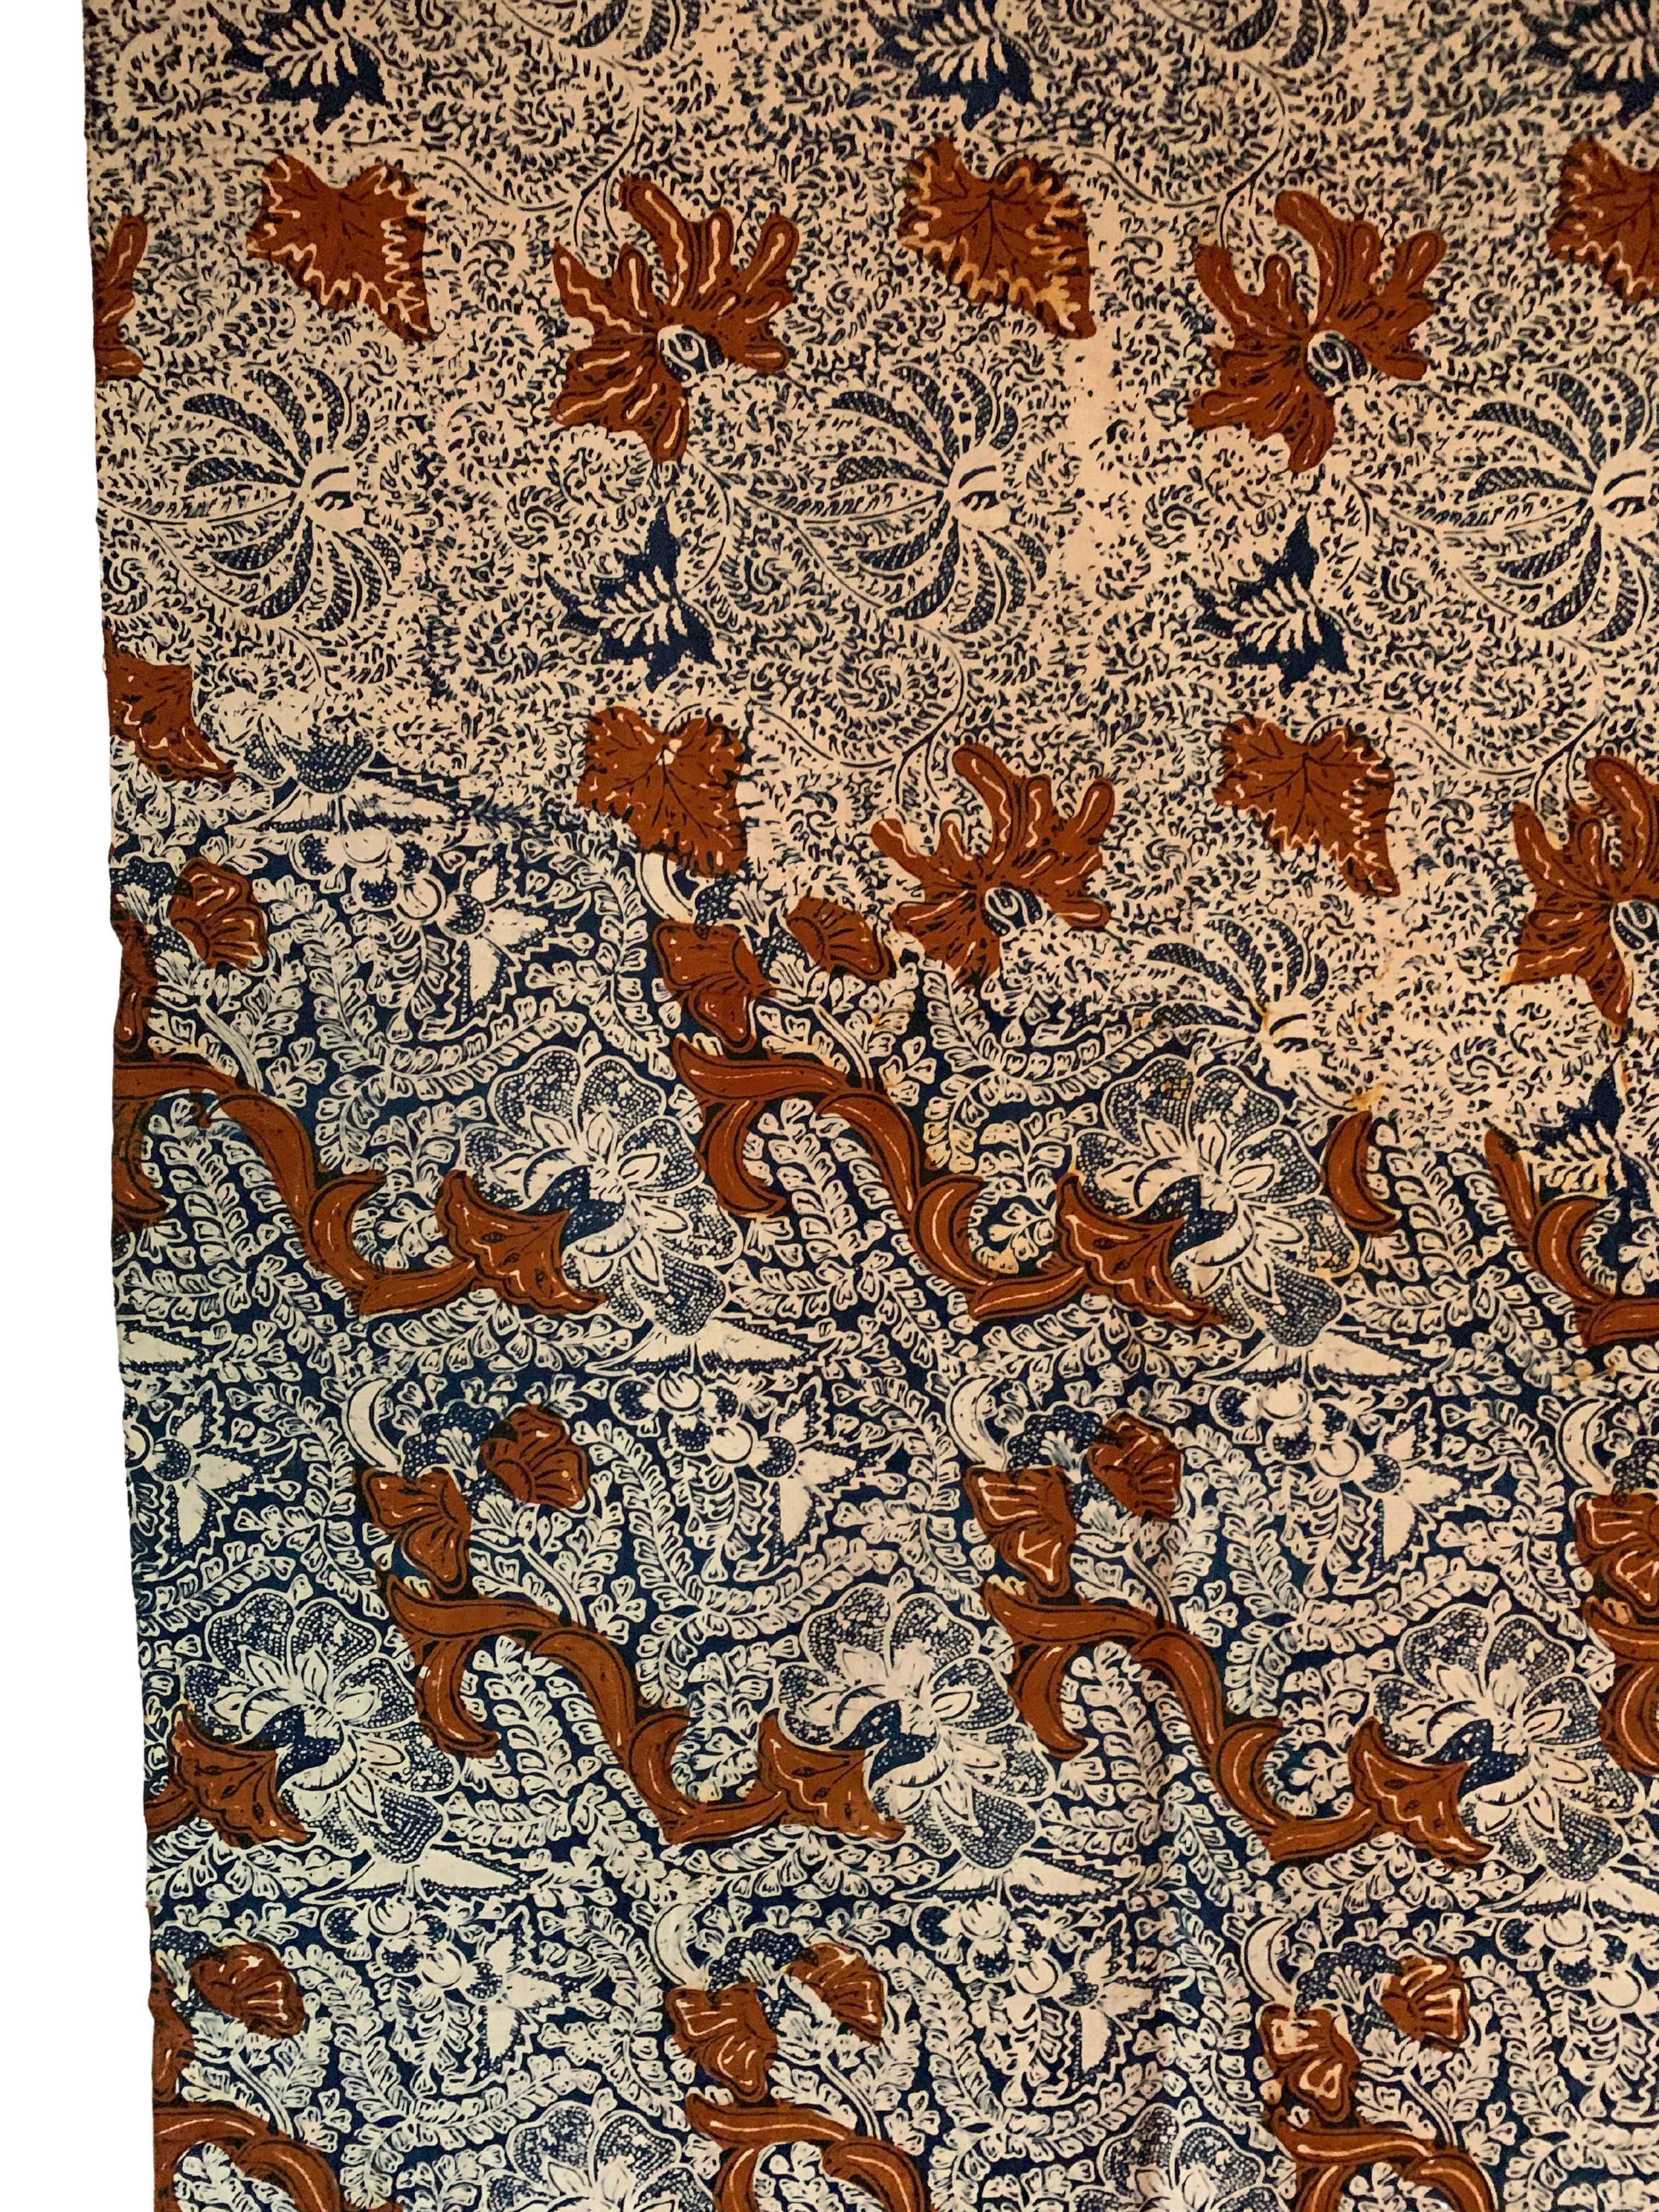 A fine example of a batik textile from Solo, Java, Indonesia. This textile features wonderful detailing & contrast. It features a wonderful array of floral motifs throughout. 

